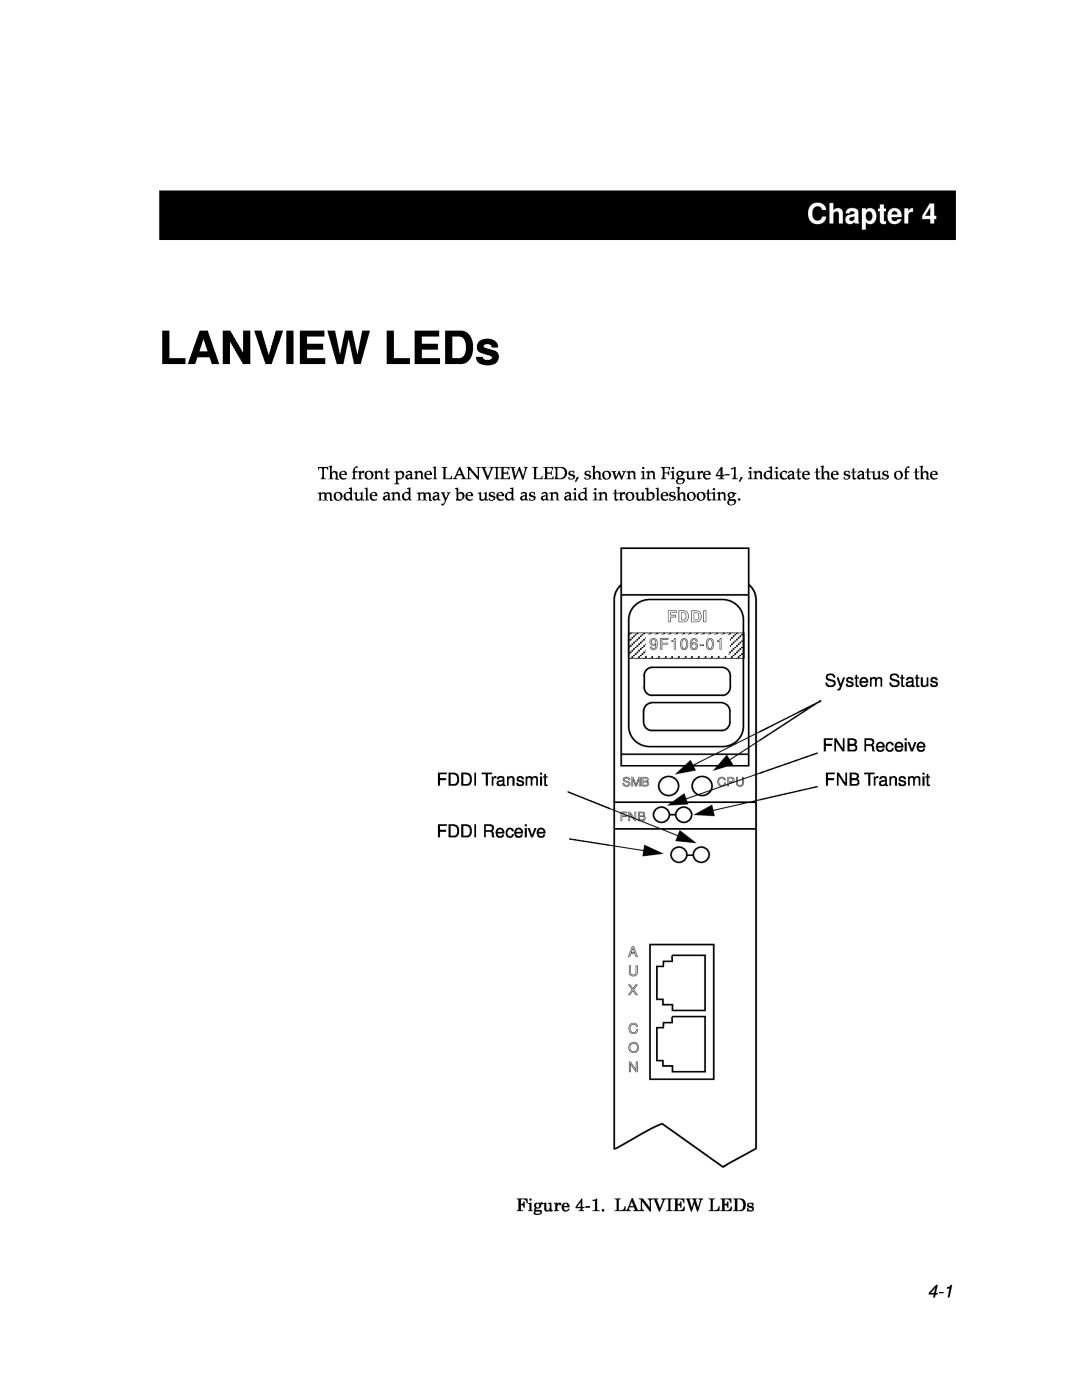 Cabletron Systems 9F106-01 LANVIEW LEDs, Chapter, FNB Receive, FDDI Transmit, FNB Transmit, FDDI Receive, System Status 